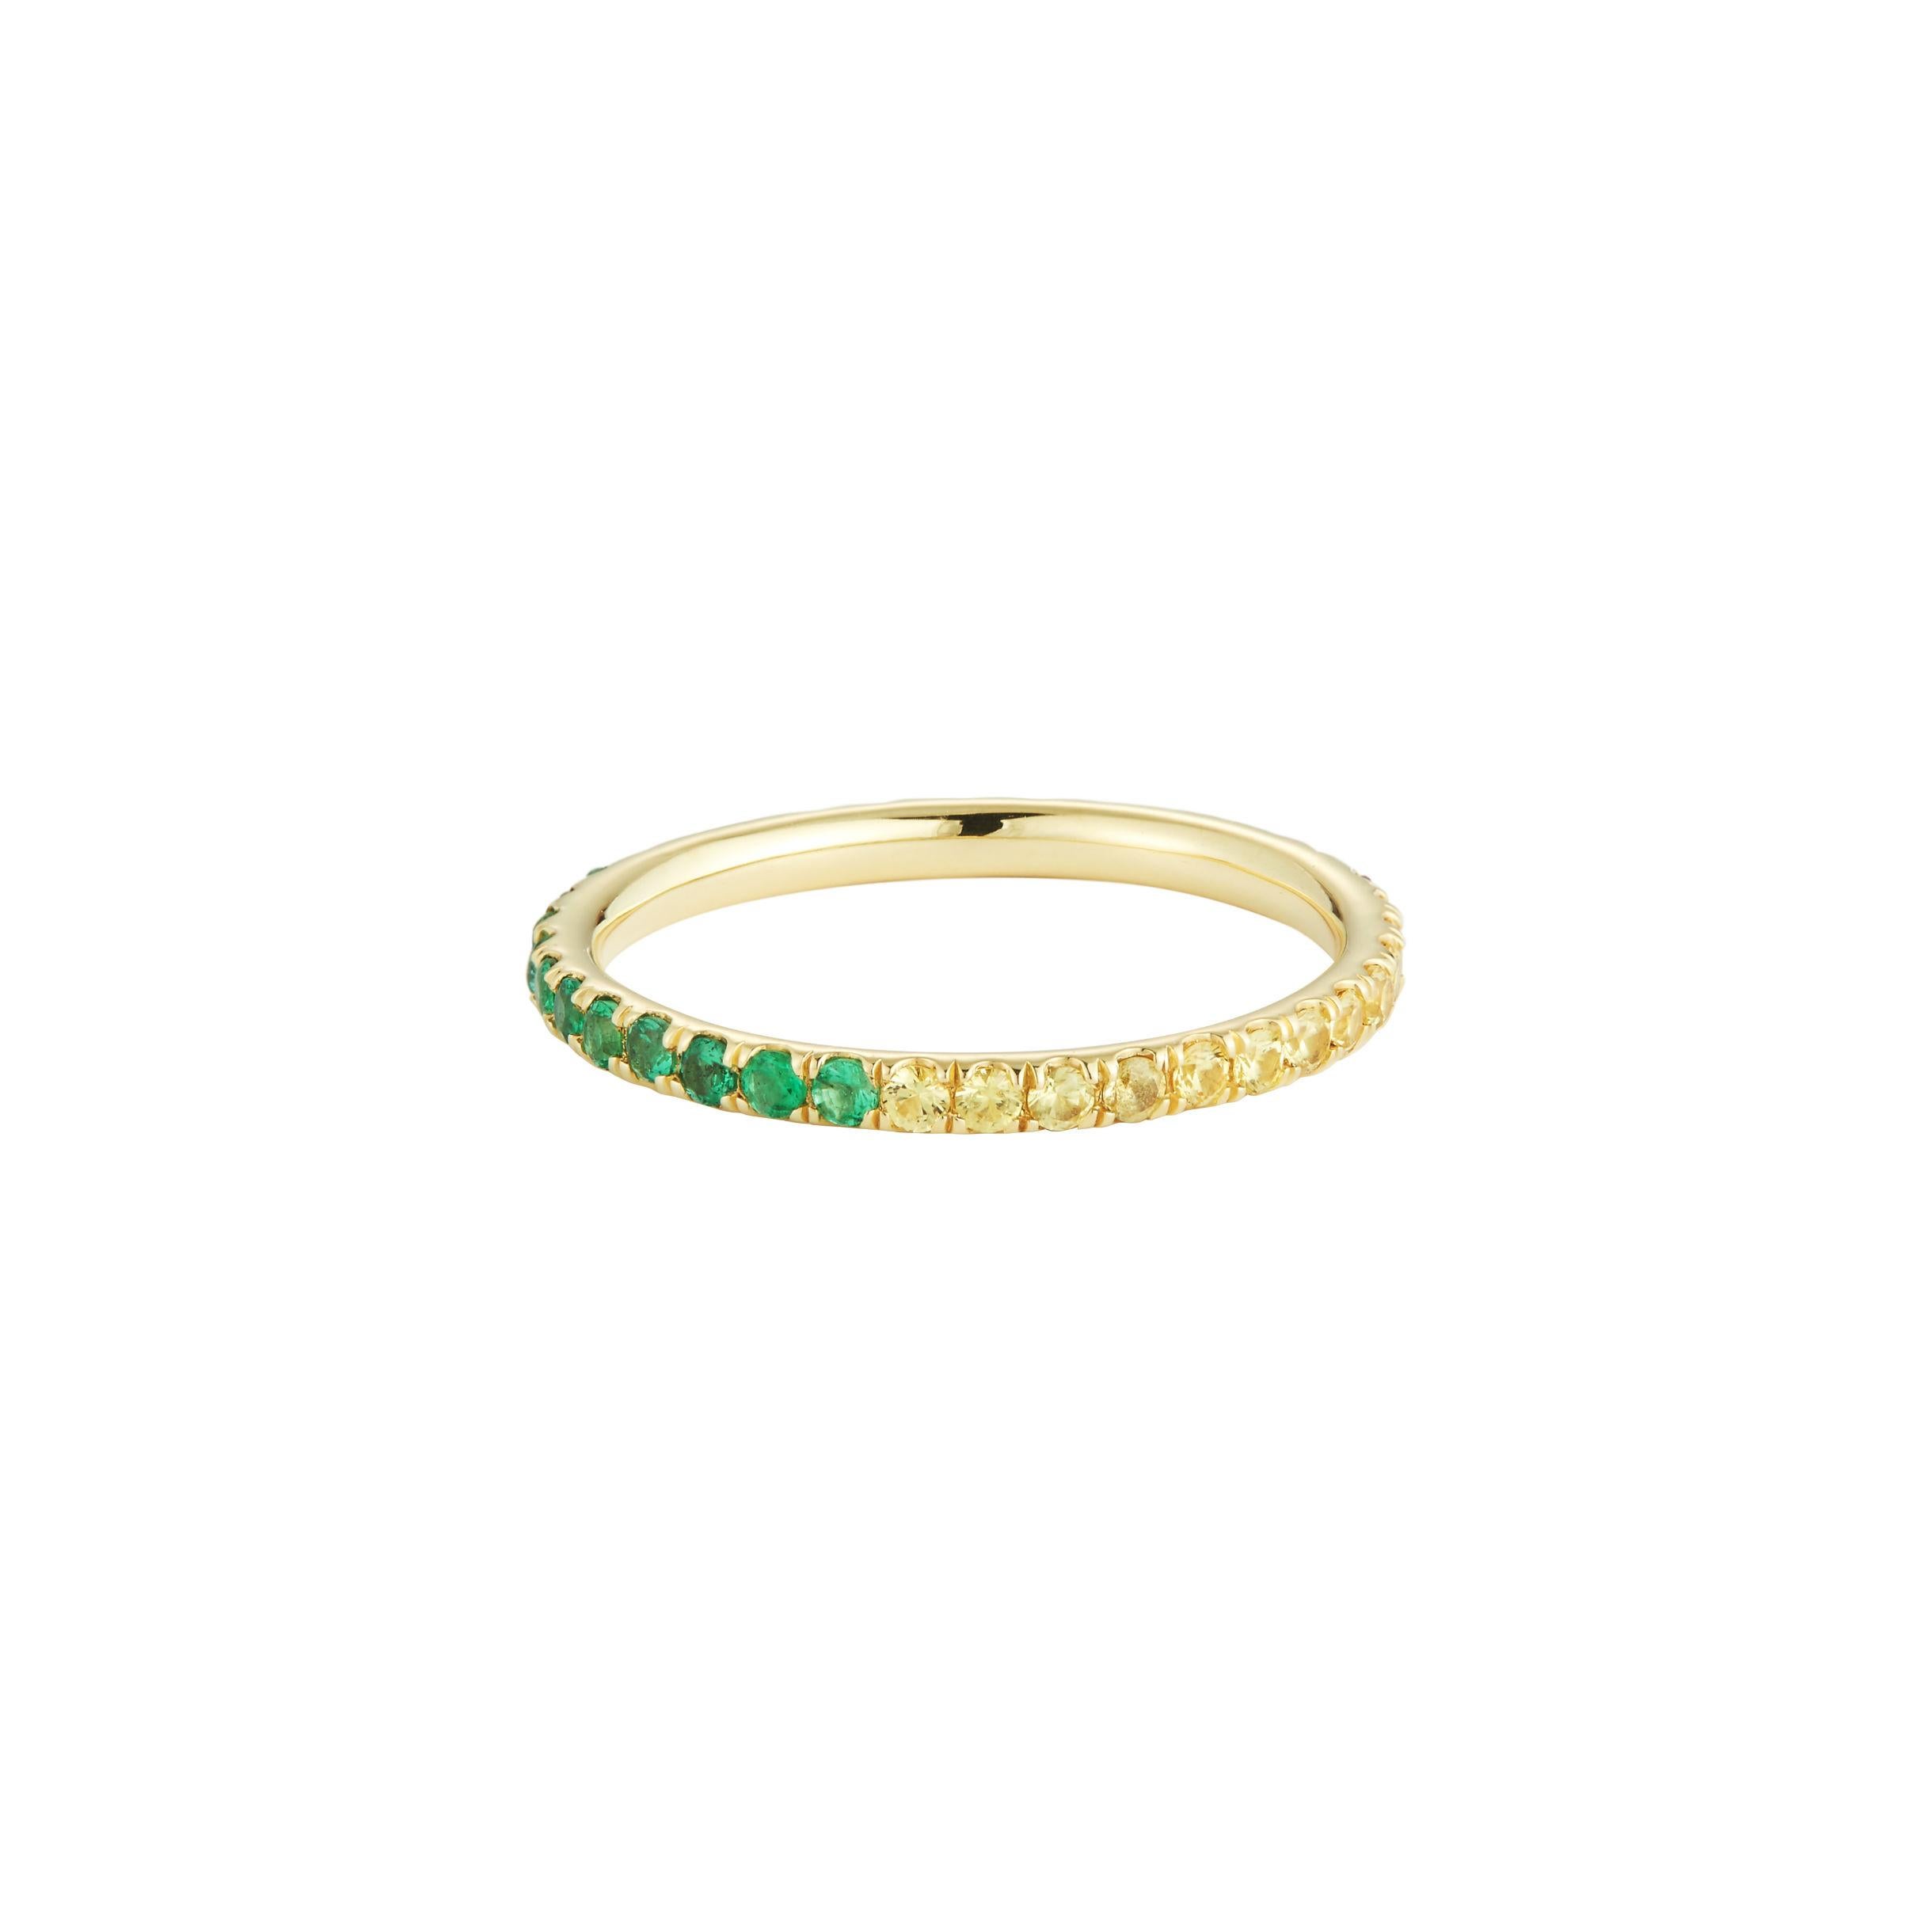 Inspired by the musical genre (yes!), the Ska eternity band showcases 0.19 carats of emeralds, 0.25 carats of rubies, and 0.25 carats of yellow sapphires in a scoop setting. The stones are set in 18 karat yellow gold. 

NB: All of our jewelry is